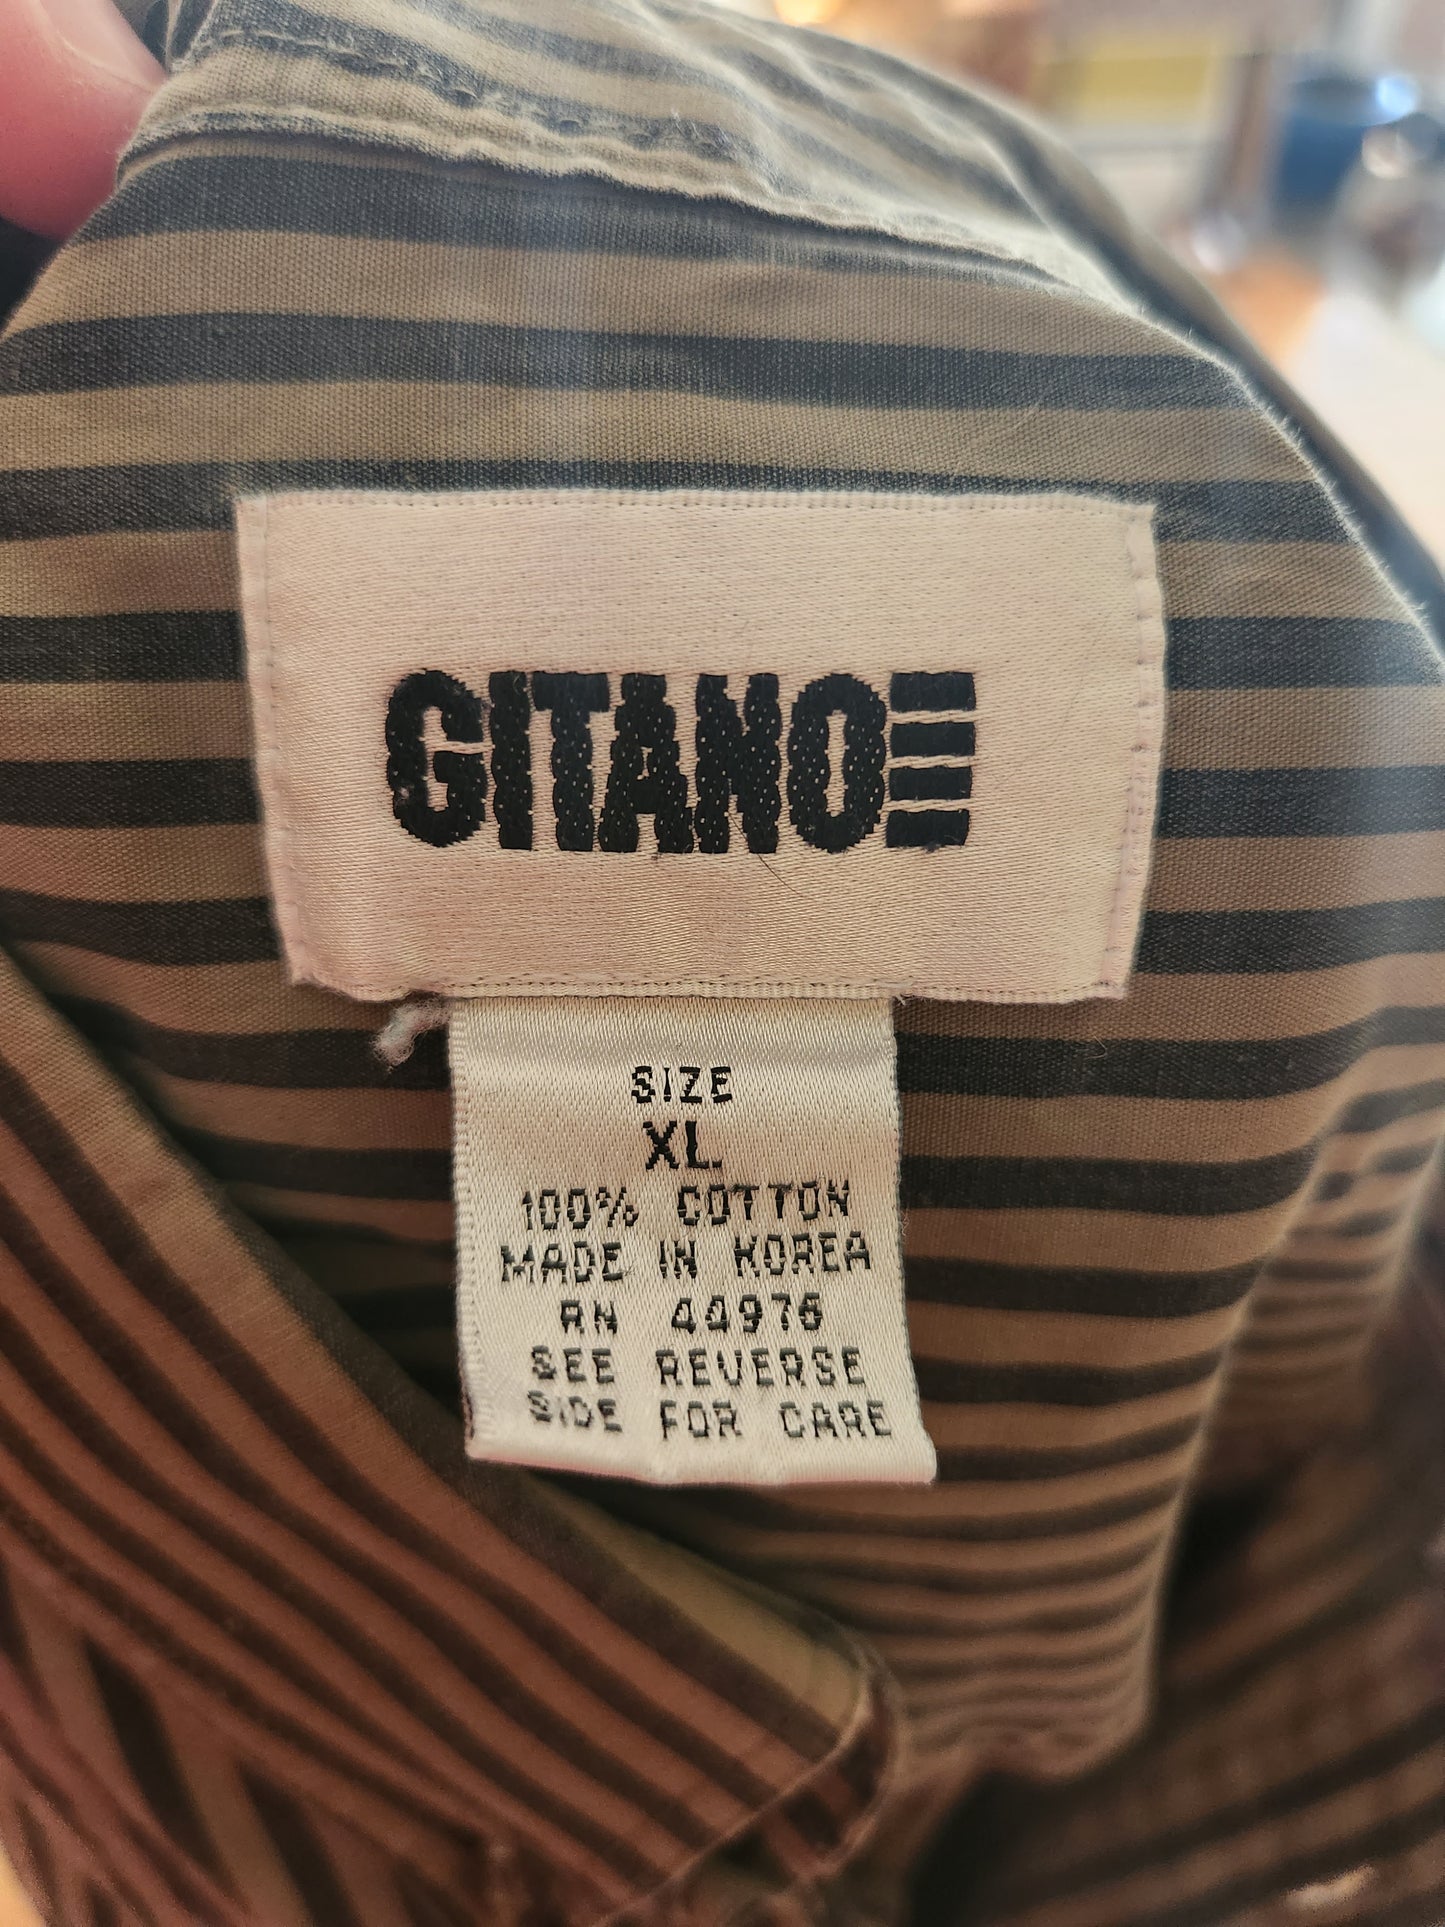 Vintage Button Down Long Sleeve Striped Shirt by Gitano